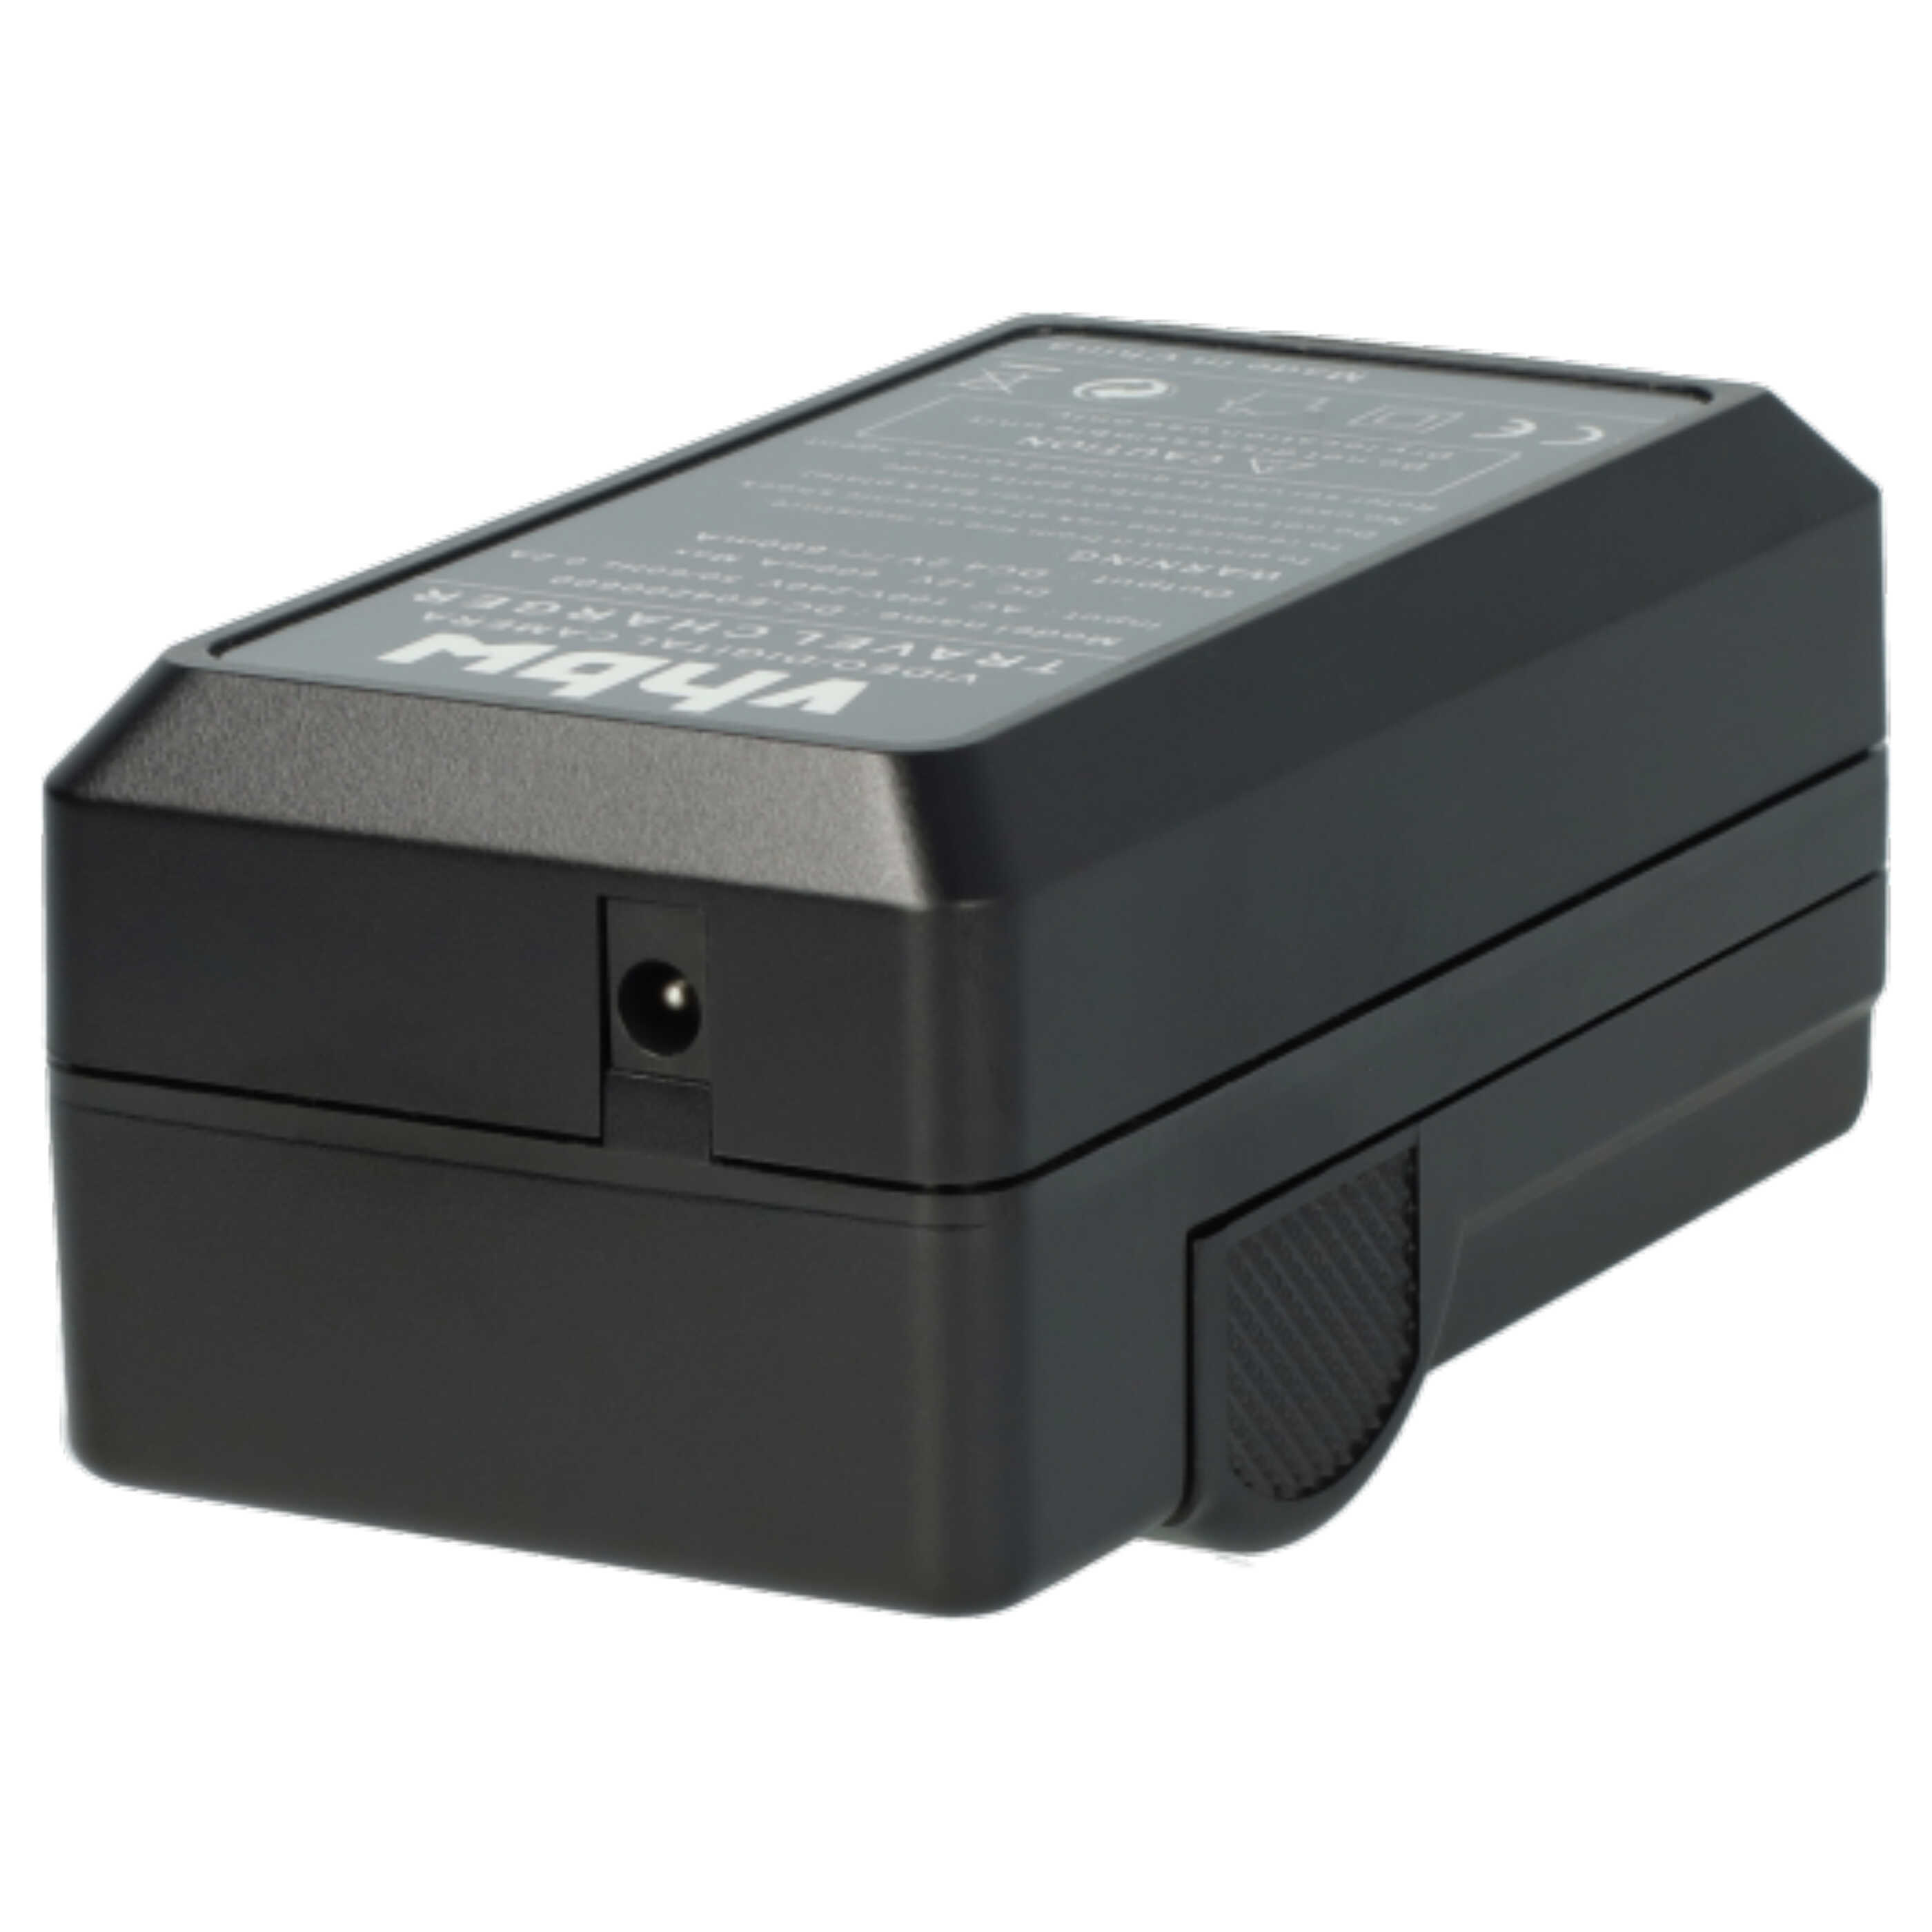 Battery Charger replaces Pentax D-BC92E suitable for Optio WG-10 Camera etc. - 0.6 A, 4.2 V